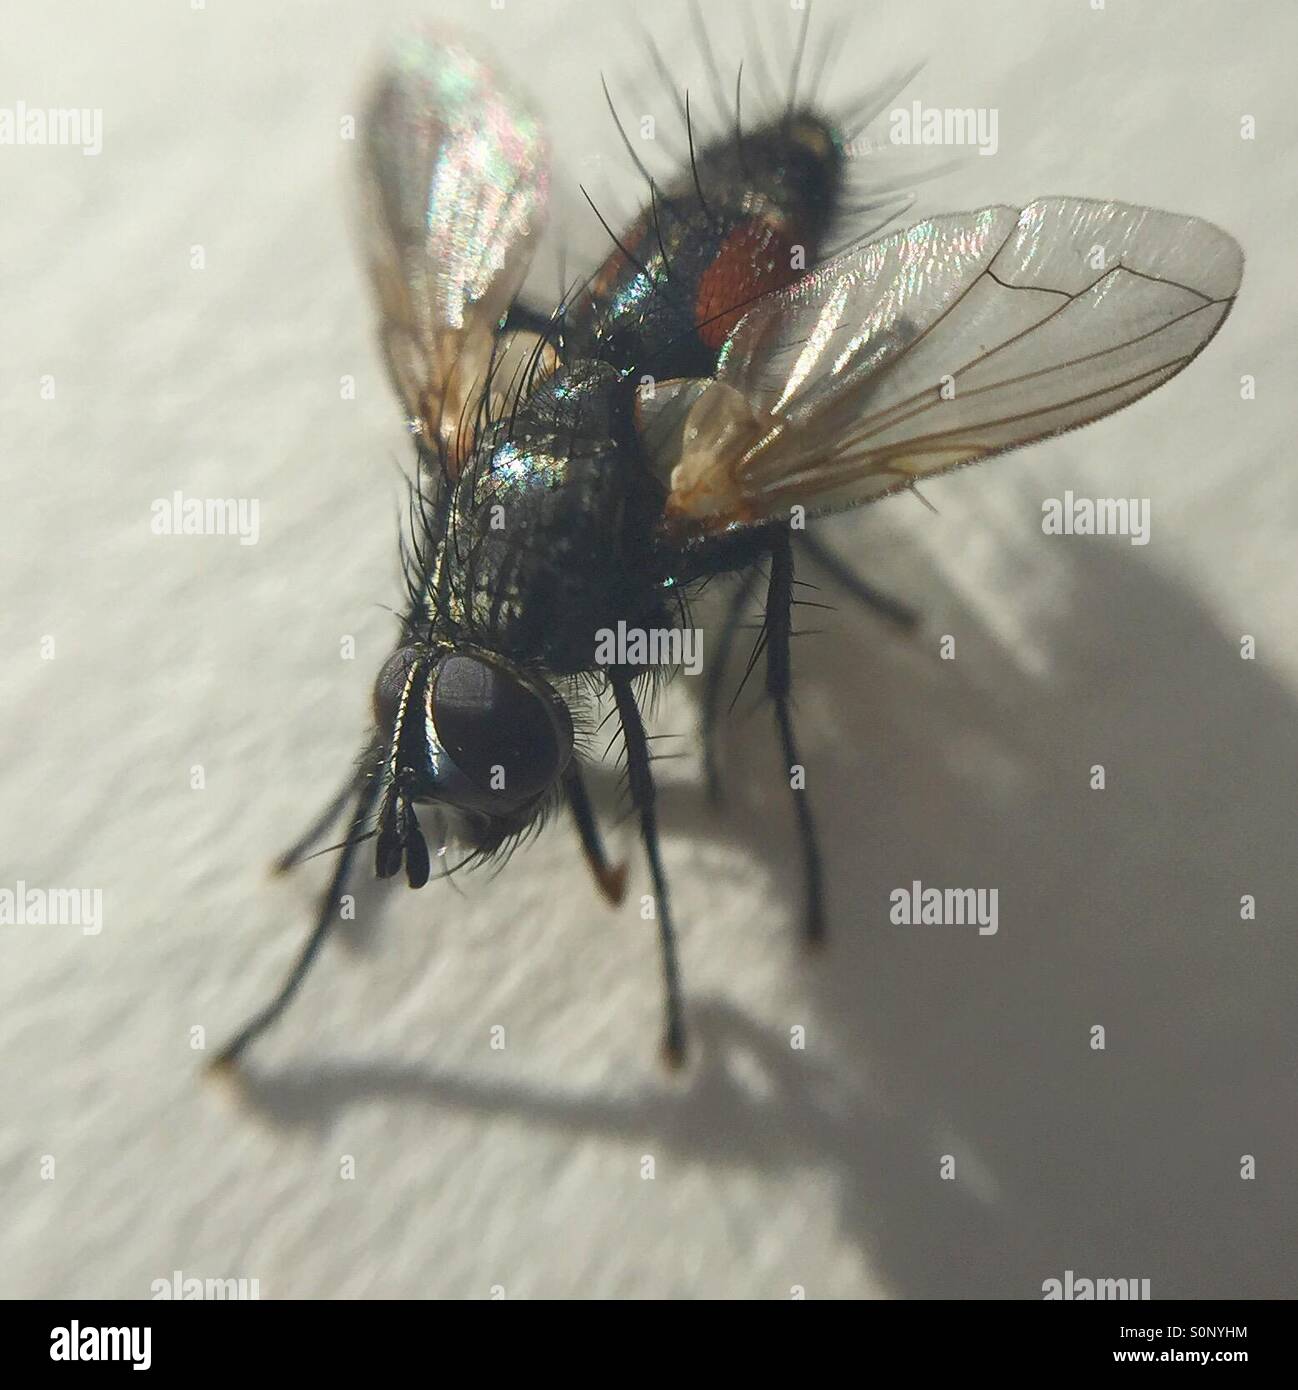 A dead fly on paper Stock Photo